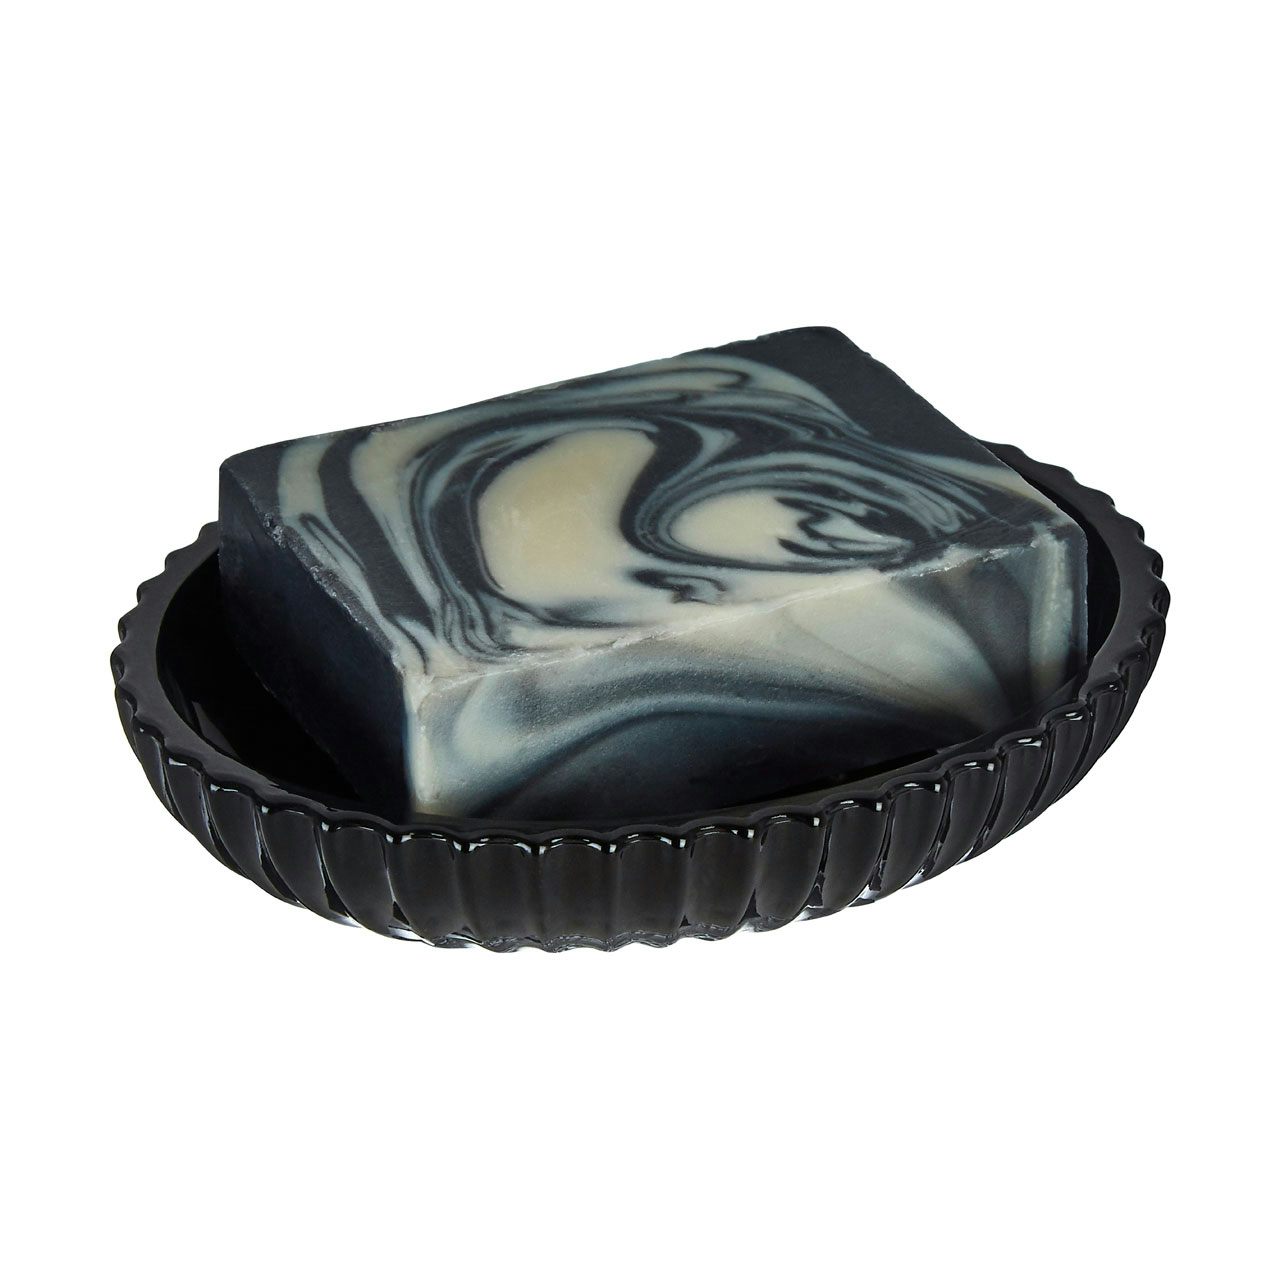 Accents Brittany black ribbed glass soap dish